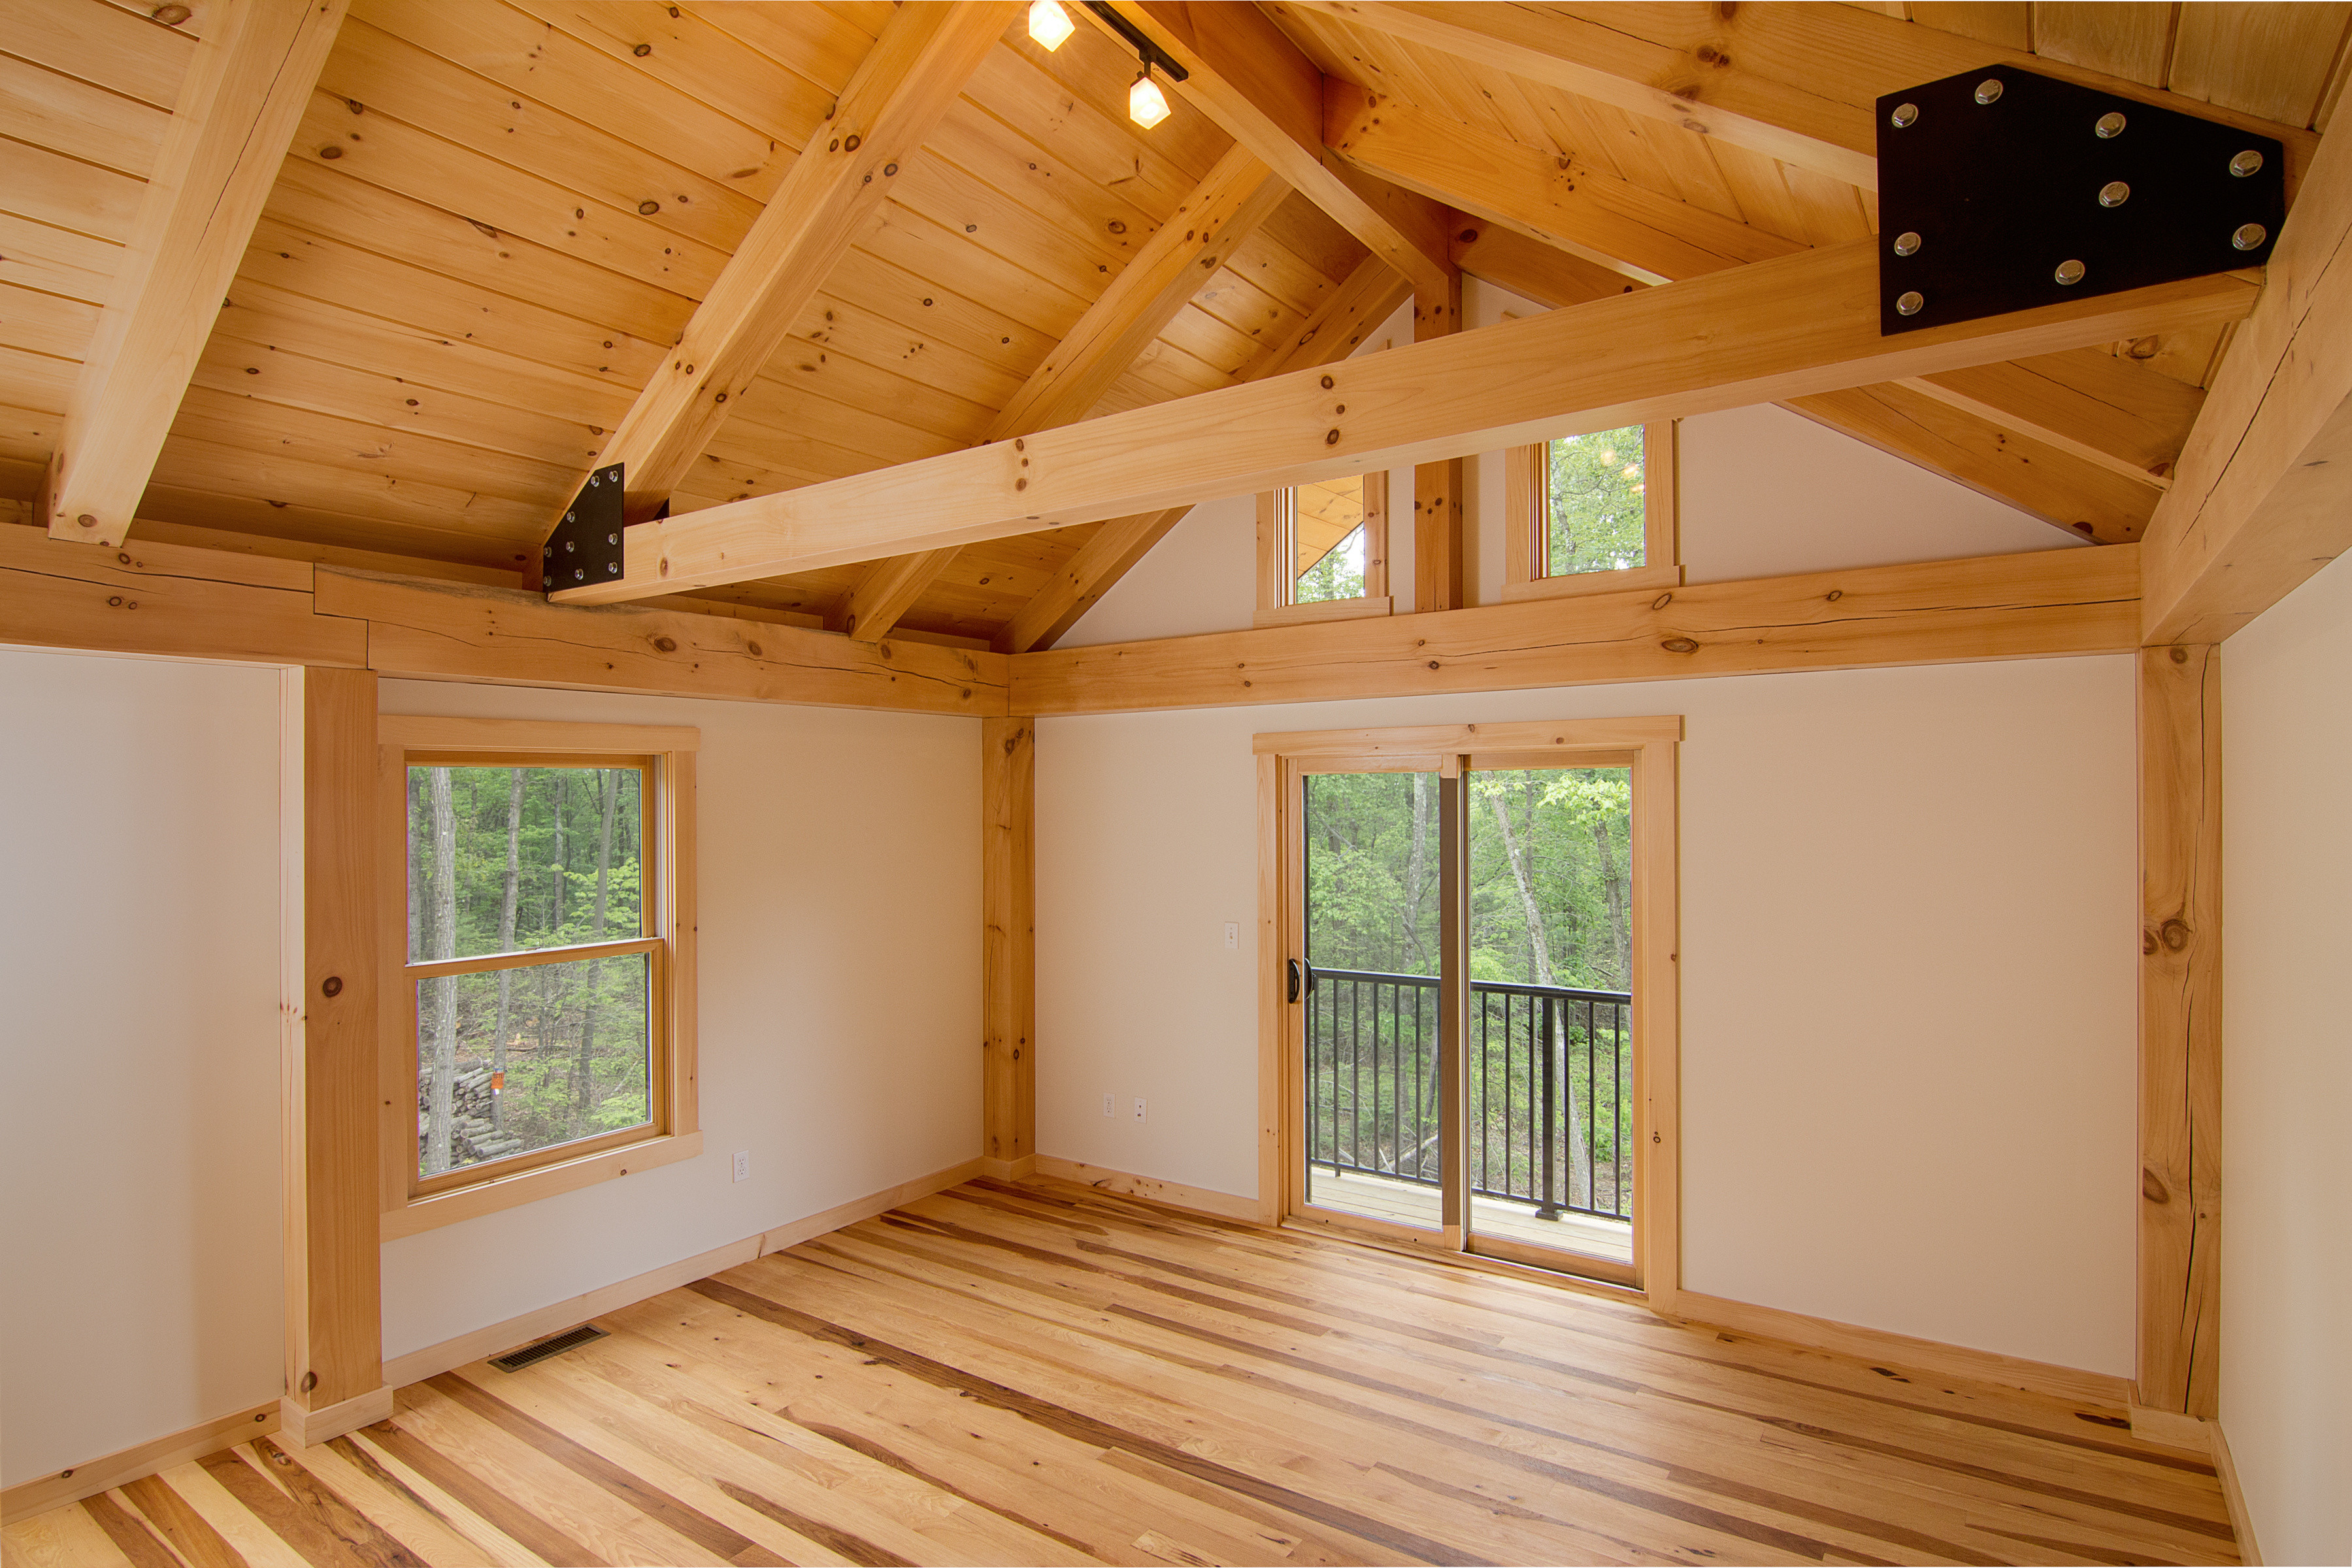 Introducing Our New Custom Timber Frame Home Product Line